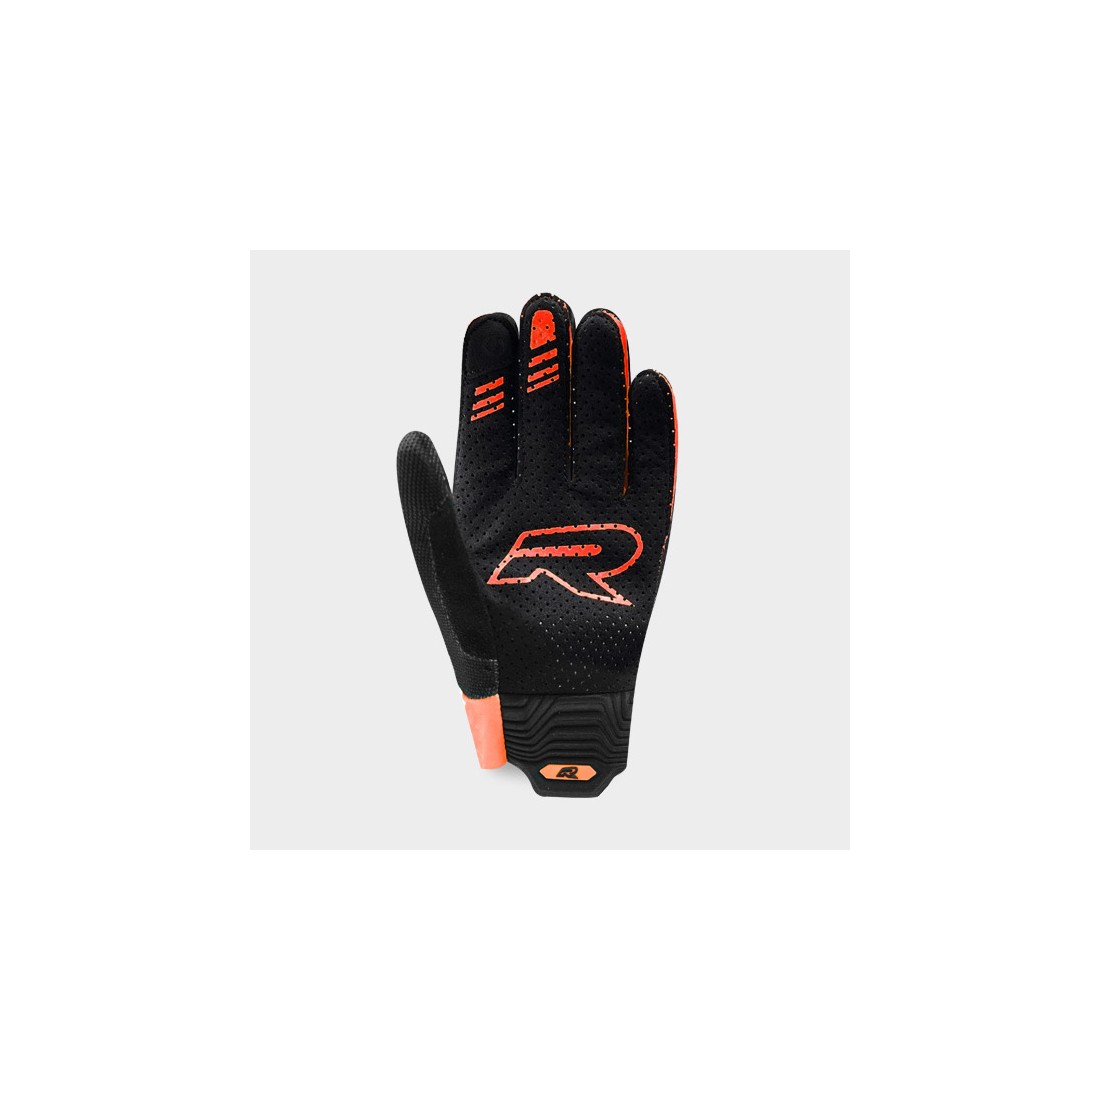 LIGHT SPEED 3 - CYCLING GLOVES